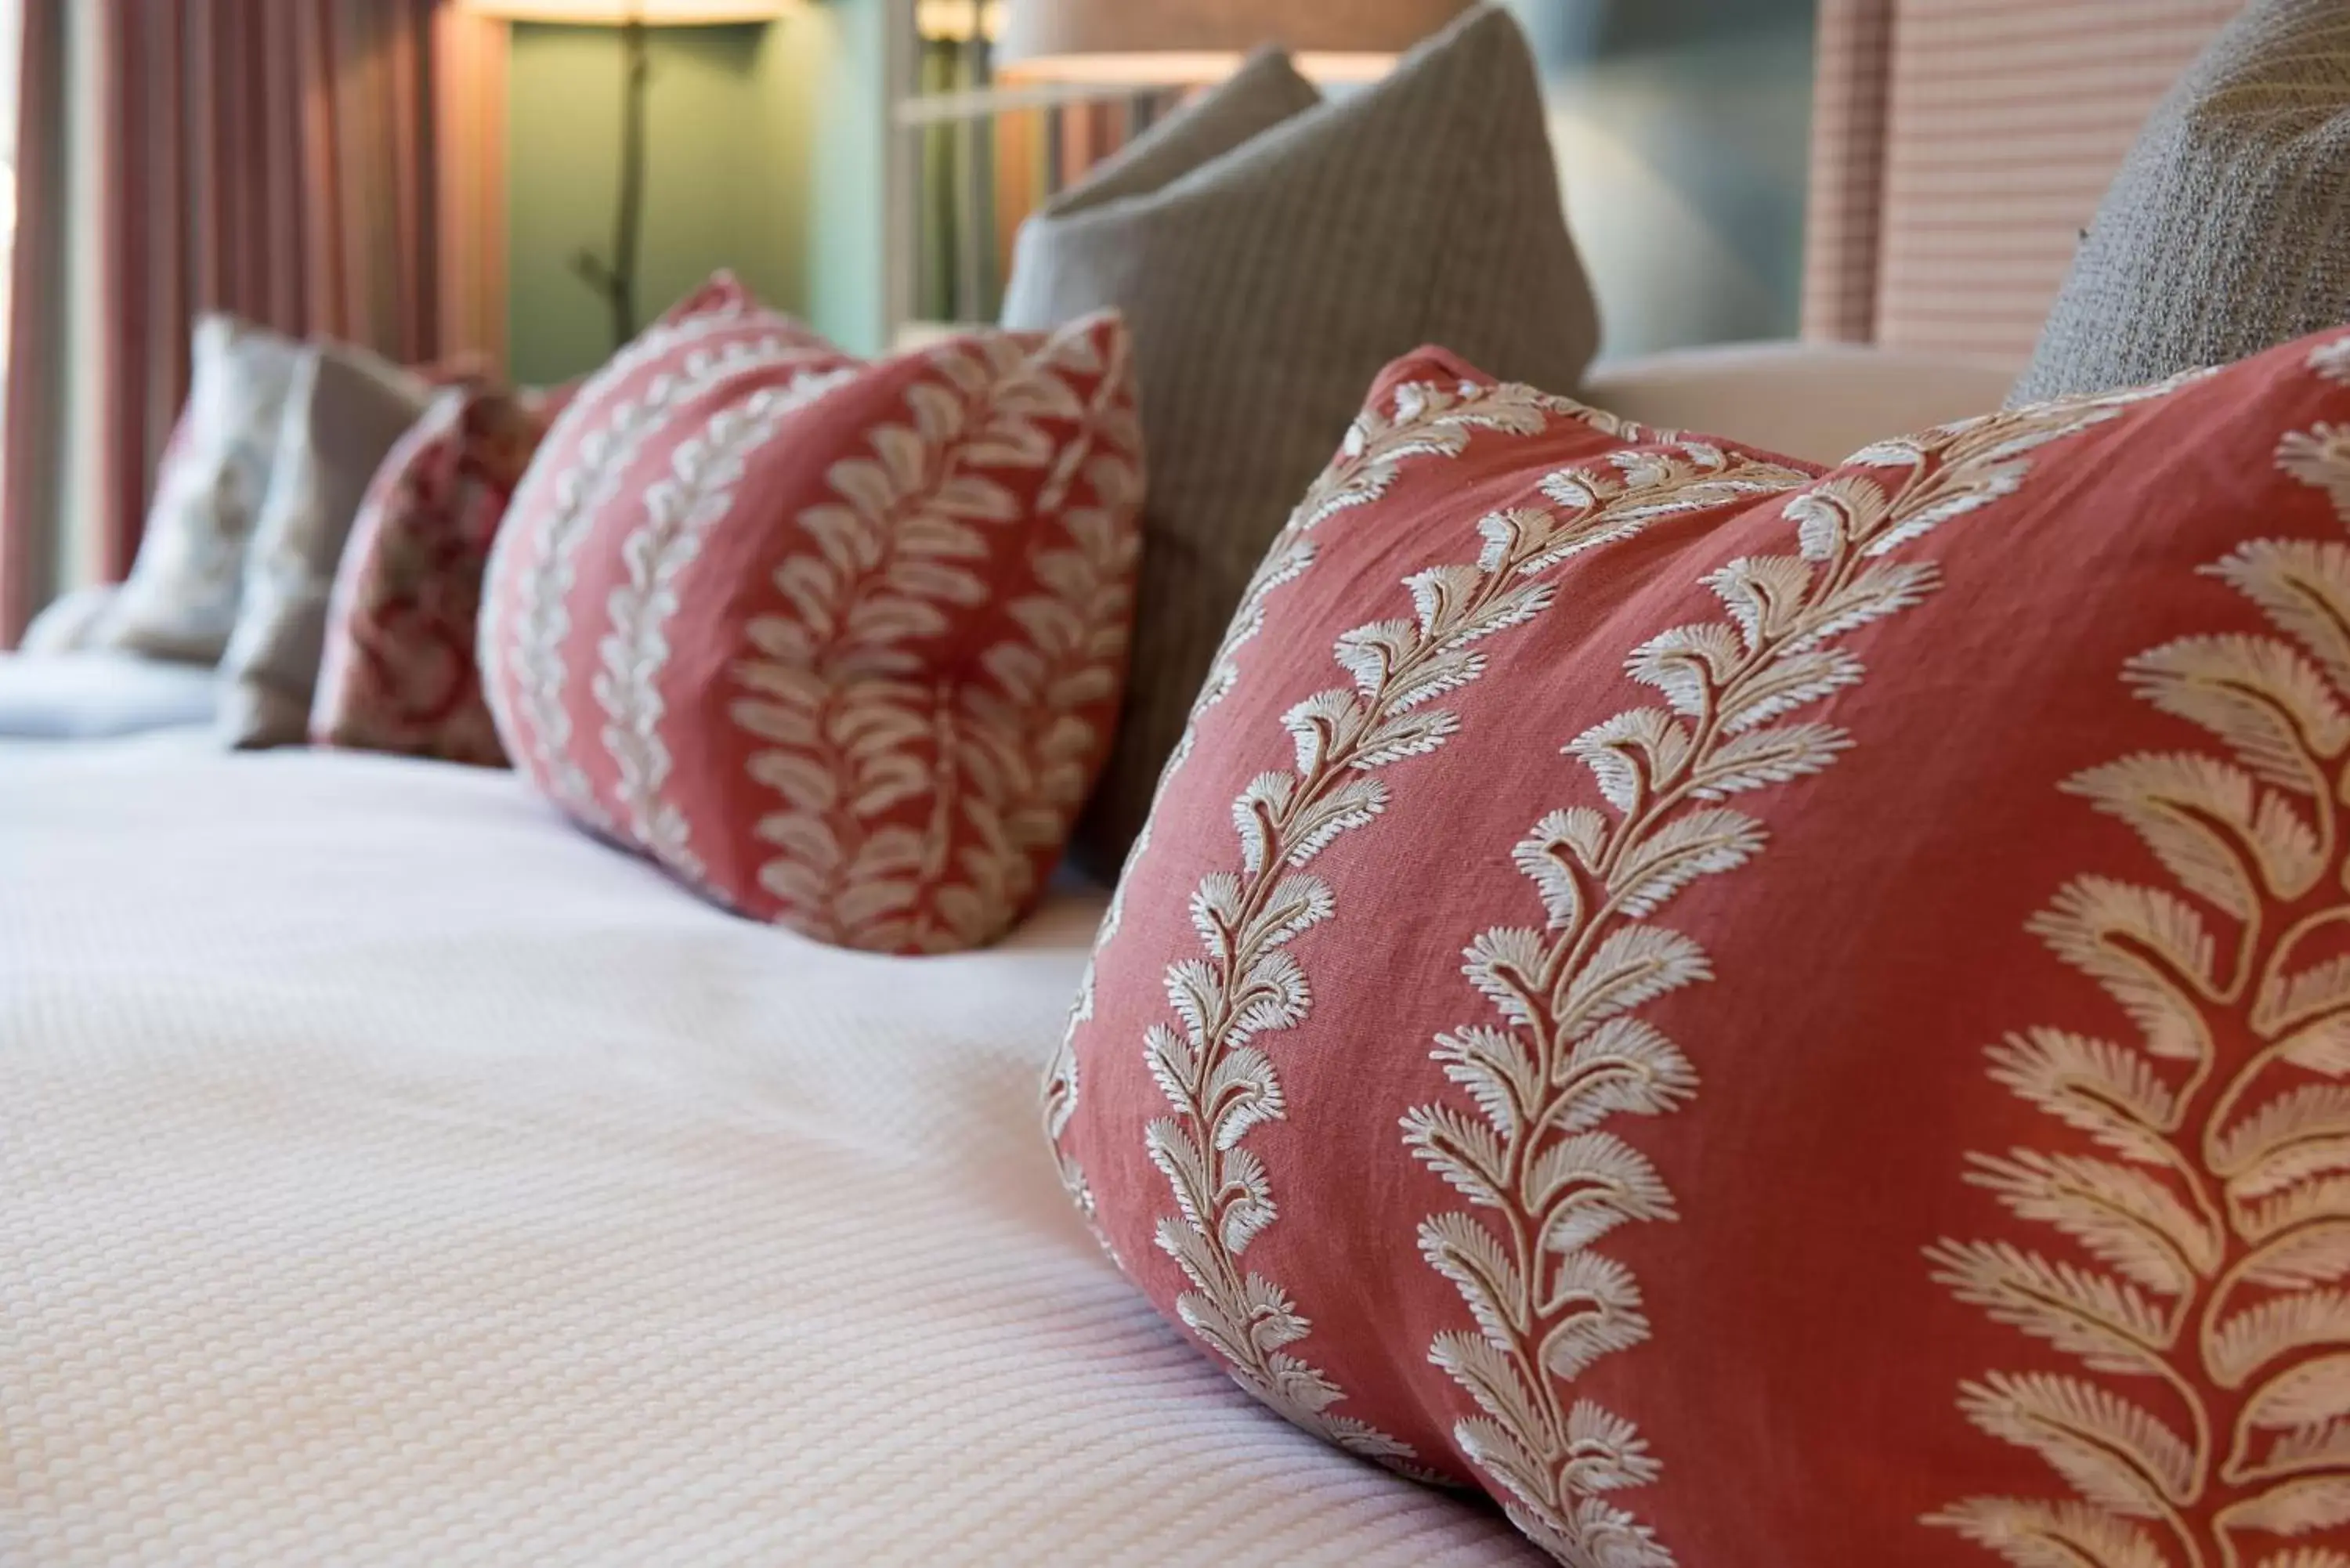 Decorative detail, Bed in Chewton Glen Hotel - an Iconic Luxury Hotel